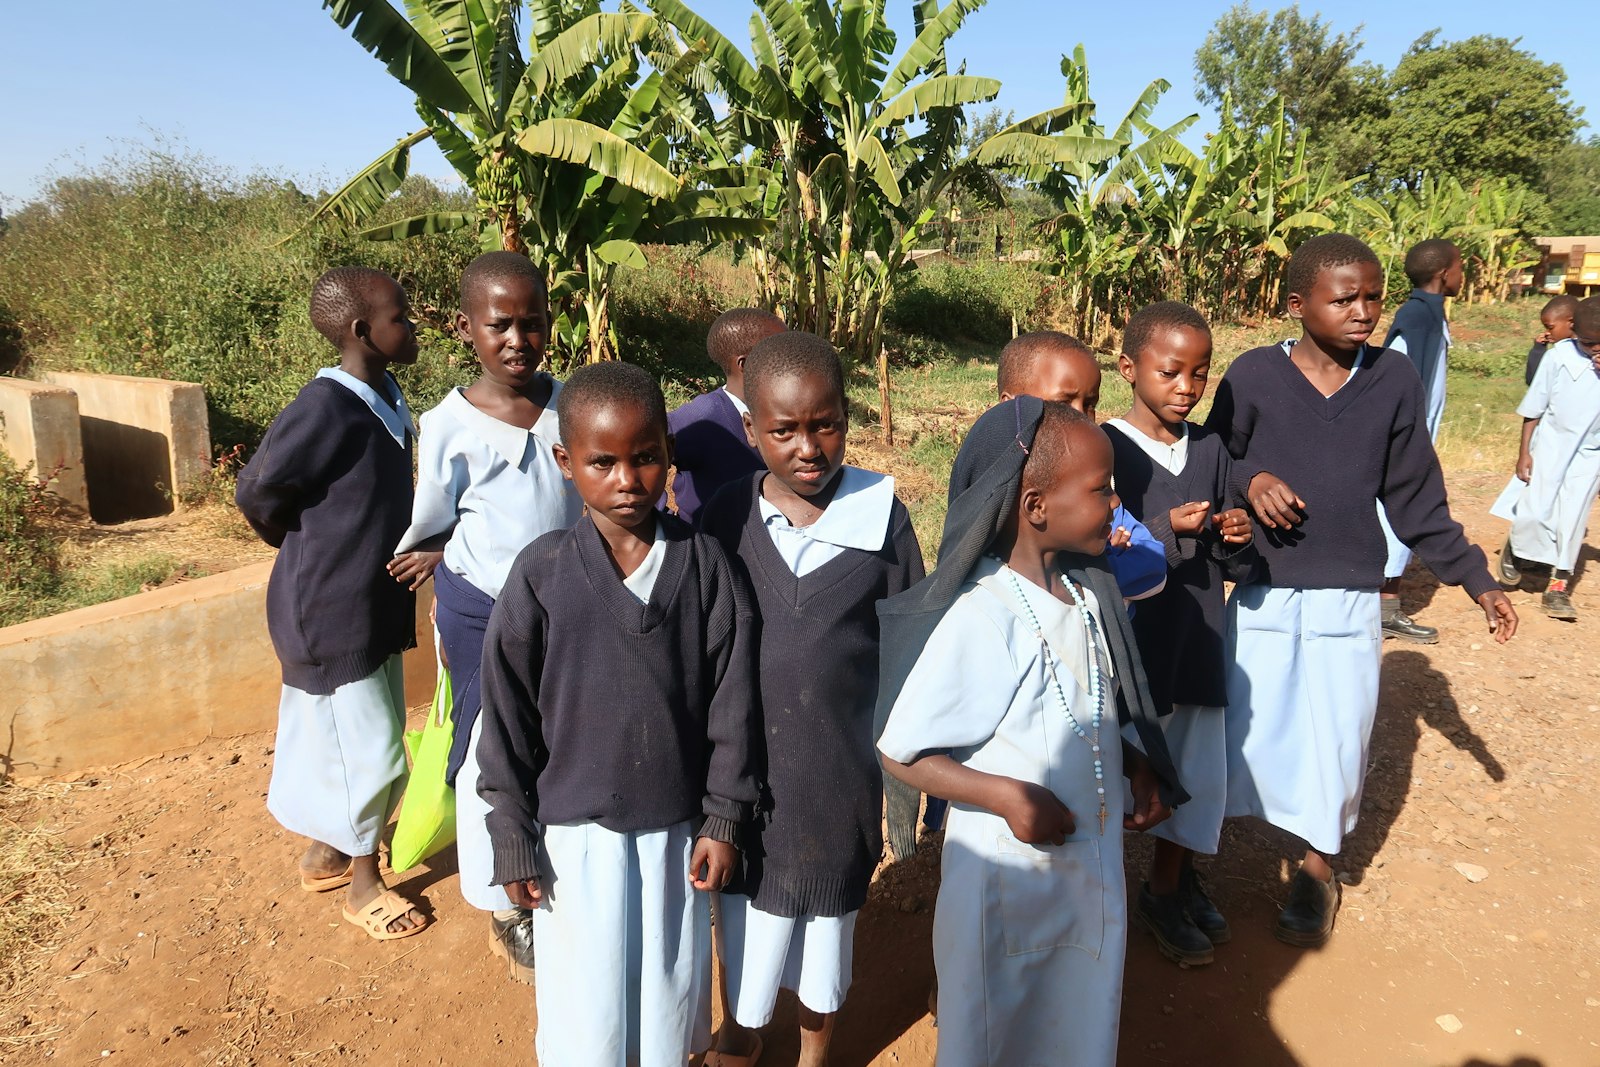 Children’s Village in Meru, Kenya, consists of the St. Clare campus for girls, St. Francis campus for boys, and the St. Florian campus for children with HIV. The village began in 1999 and right now is in the process of building a more permanent worship site – St. Rita Church – to serve the growing community.